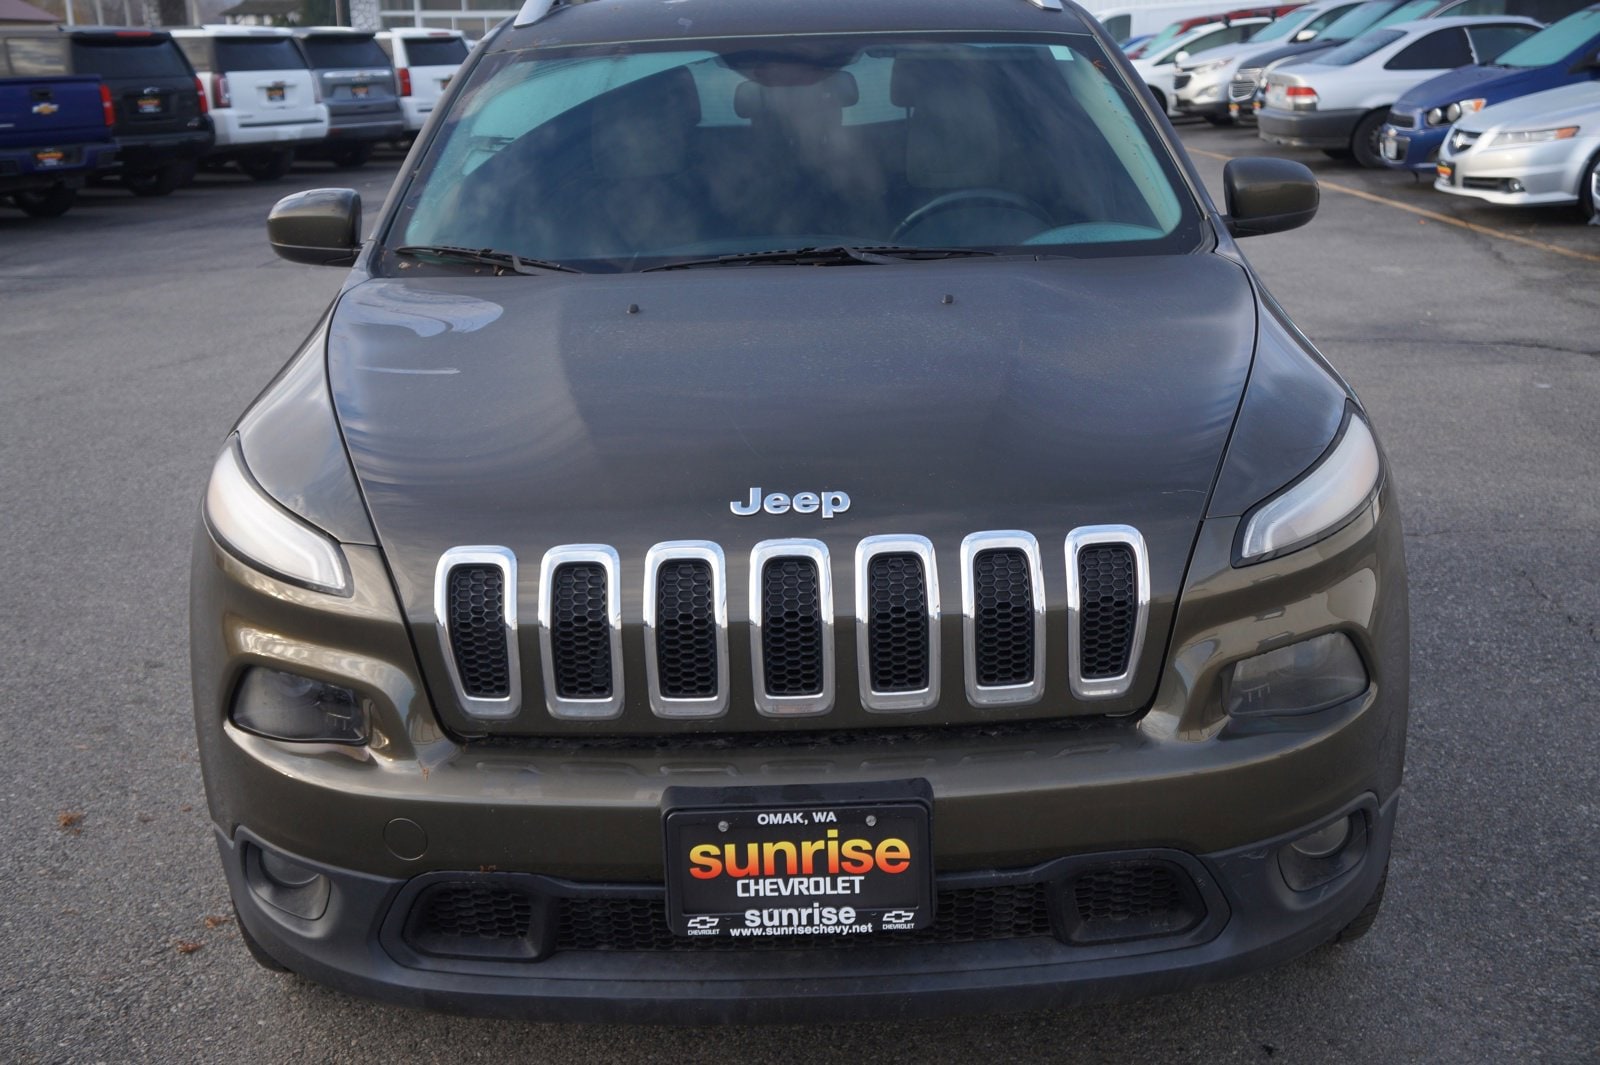 Used 2015 Jeep Cherokee Latitude with VIN 1C4PJMCS2FW510291 for sale in Omak, WA